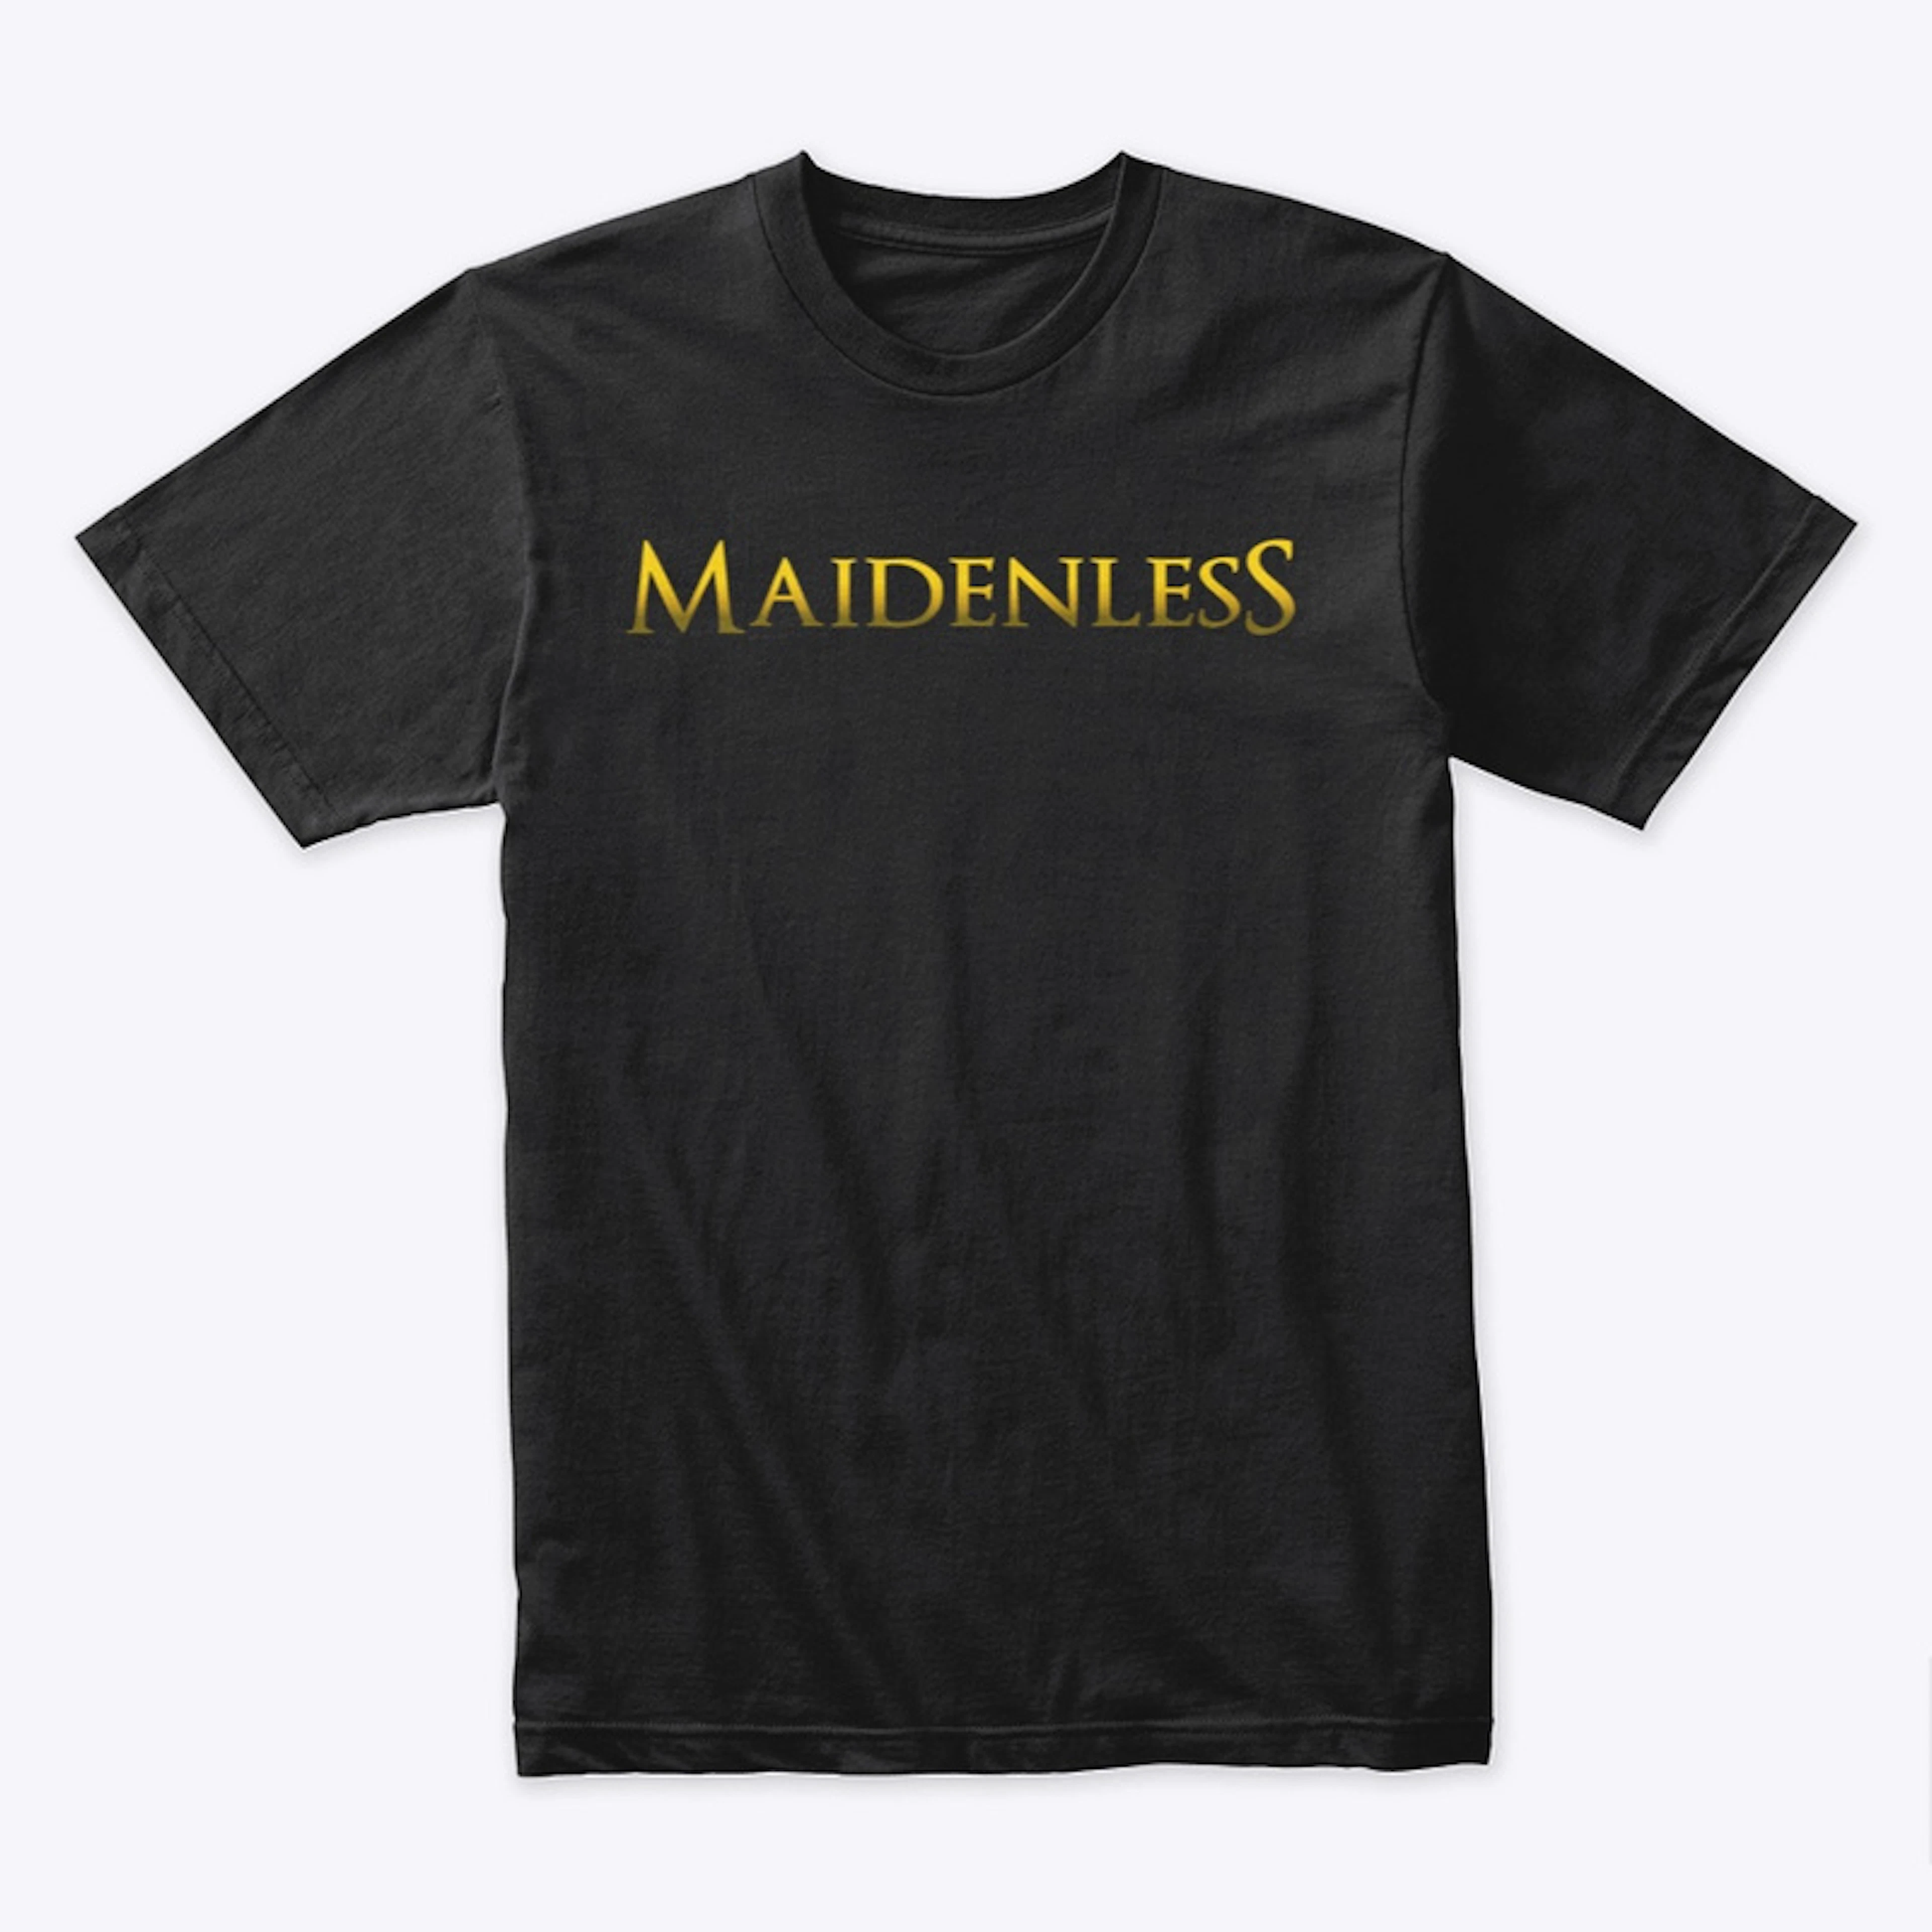 Stay Maidenless